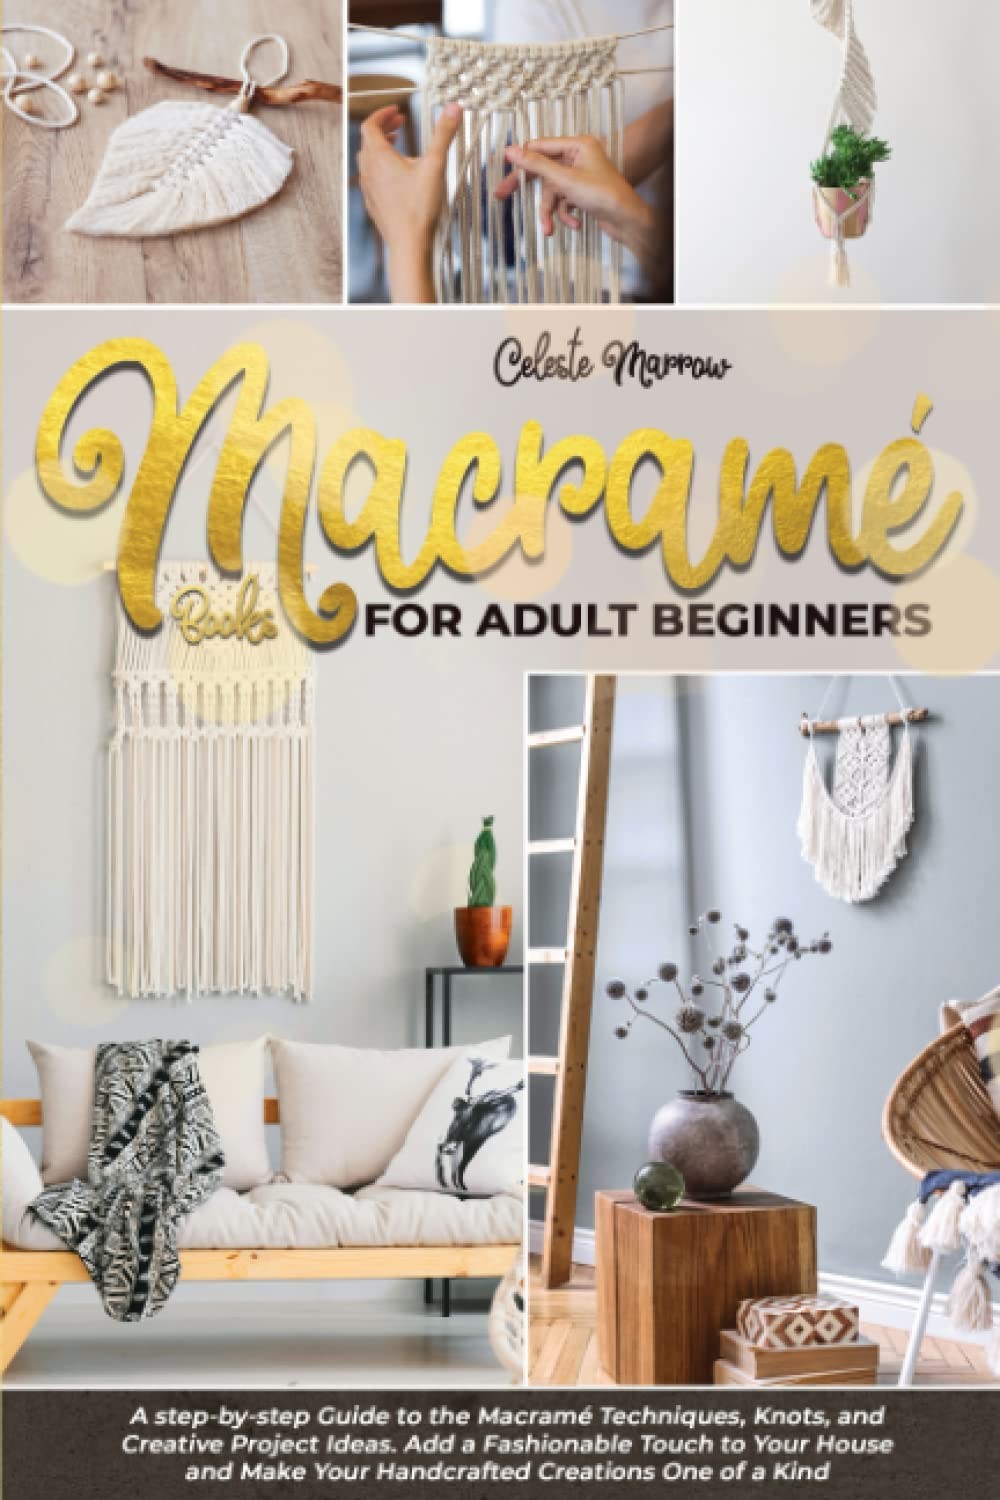 Macramé Books for Adult Beginners: A Step-By-Step Guide to the Macramé Techniques, Knots and Creative Project Ideas. Add a Fashionable Touch to Your House Make Your Handcrafted Creations One of a Kind